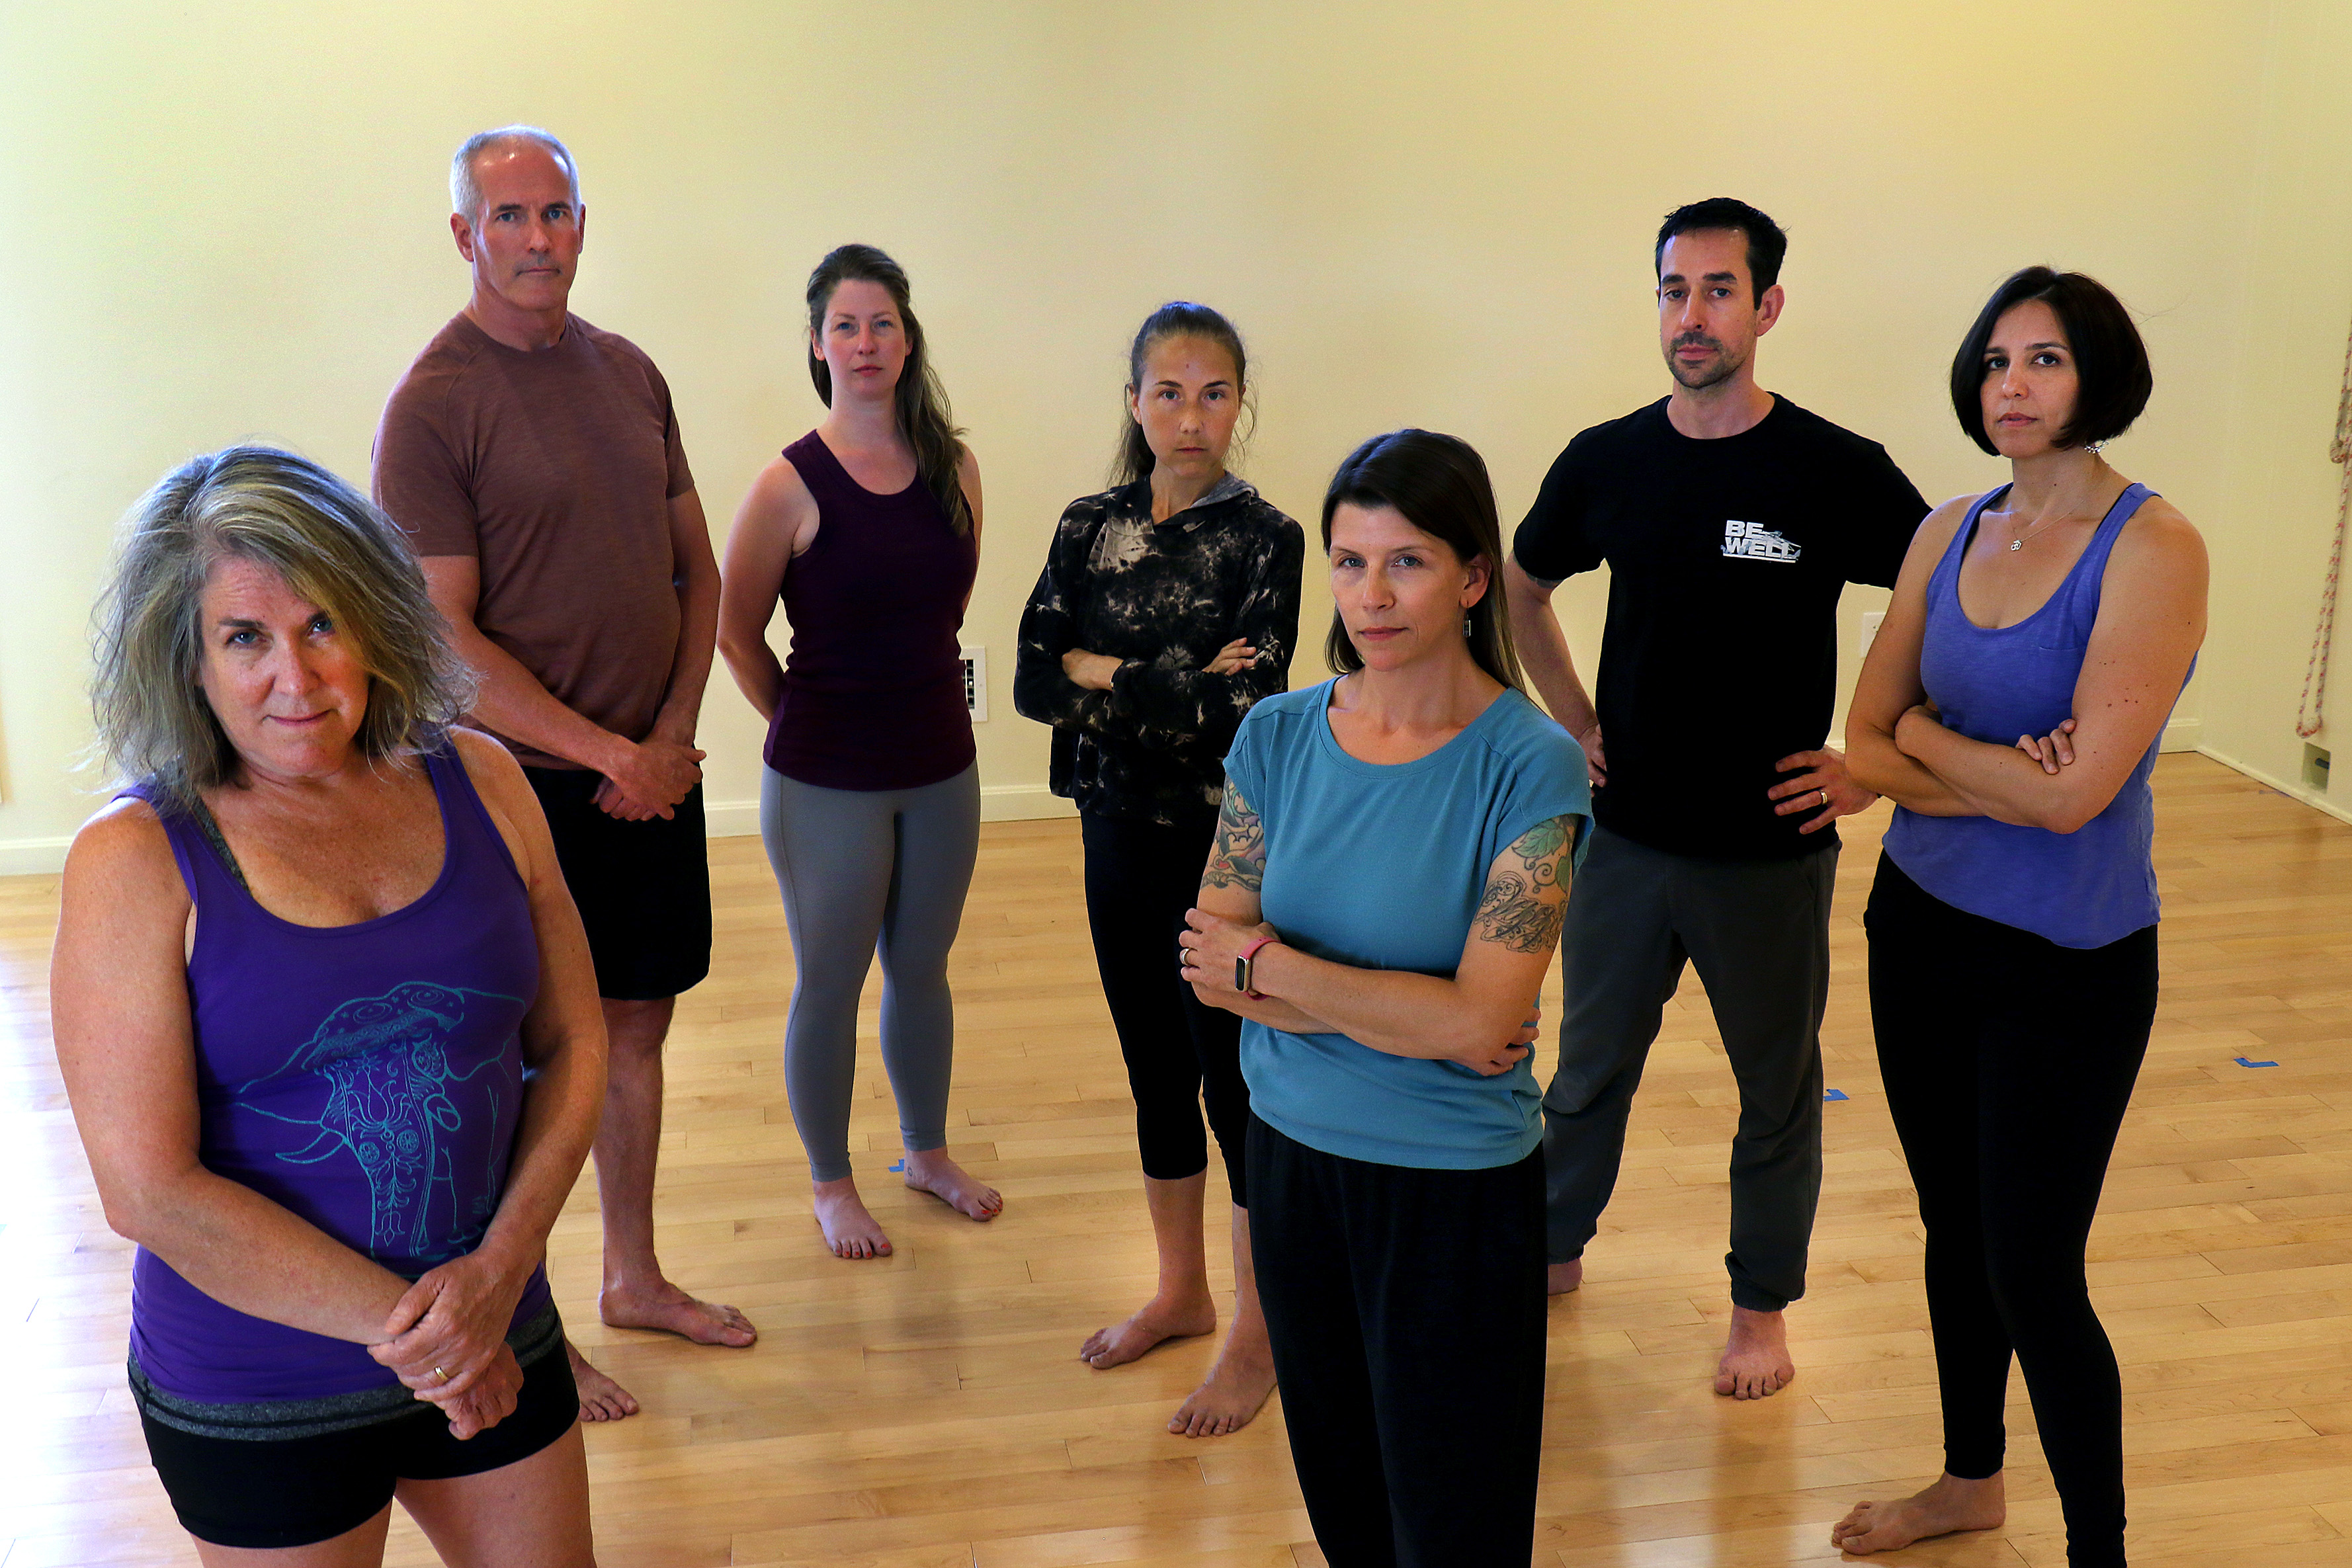 Toxicity in the land of enlightenment? This yoga dispute has the community  tied up in knots - The Boston Globe